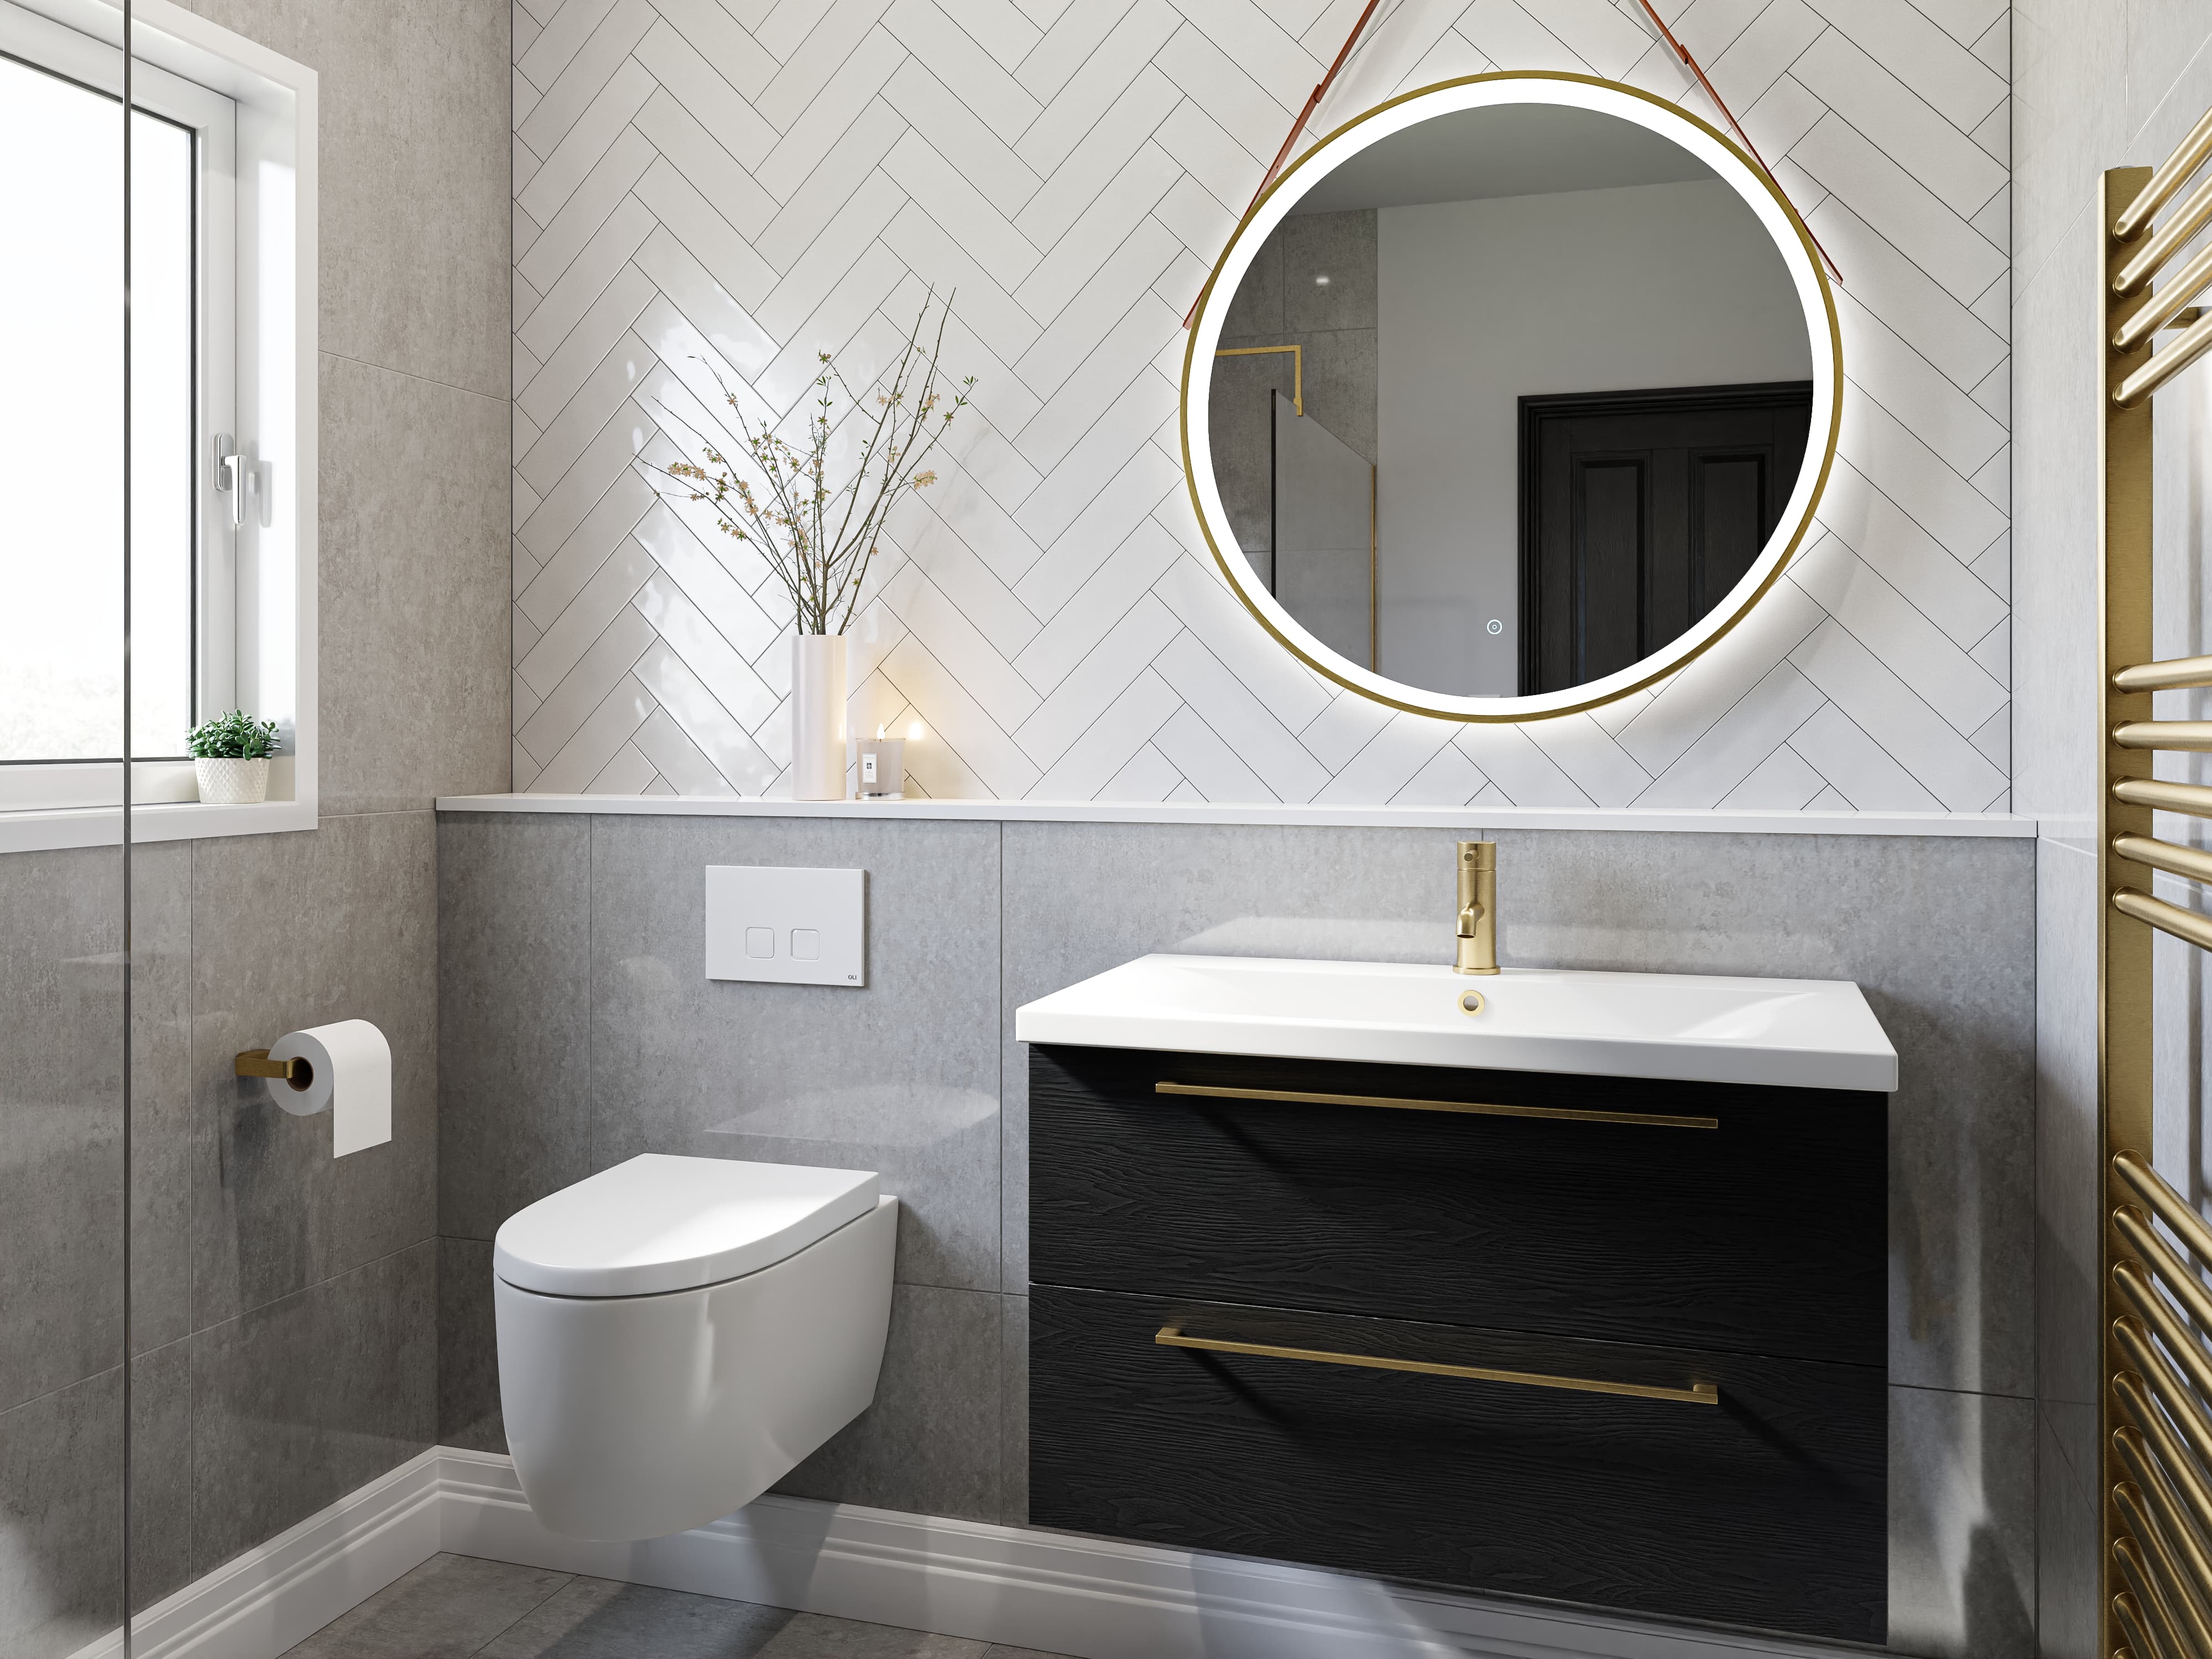 Grey and white tiled bathroom suite with navy and gold vanity unit